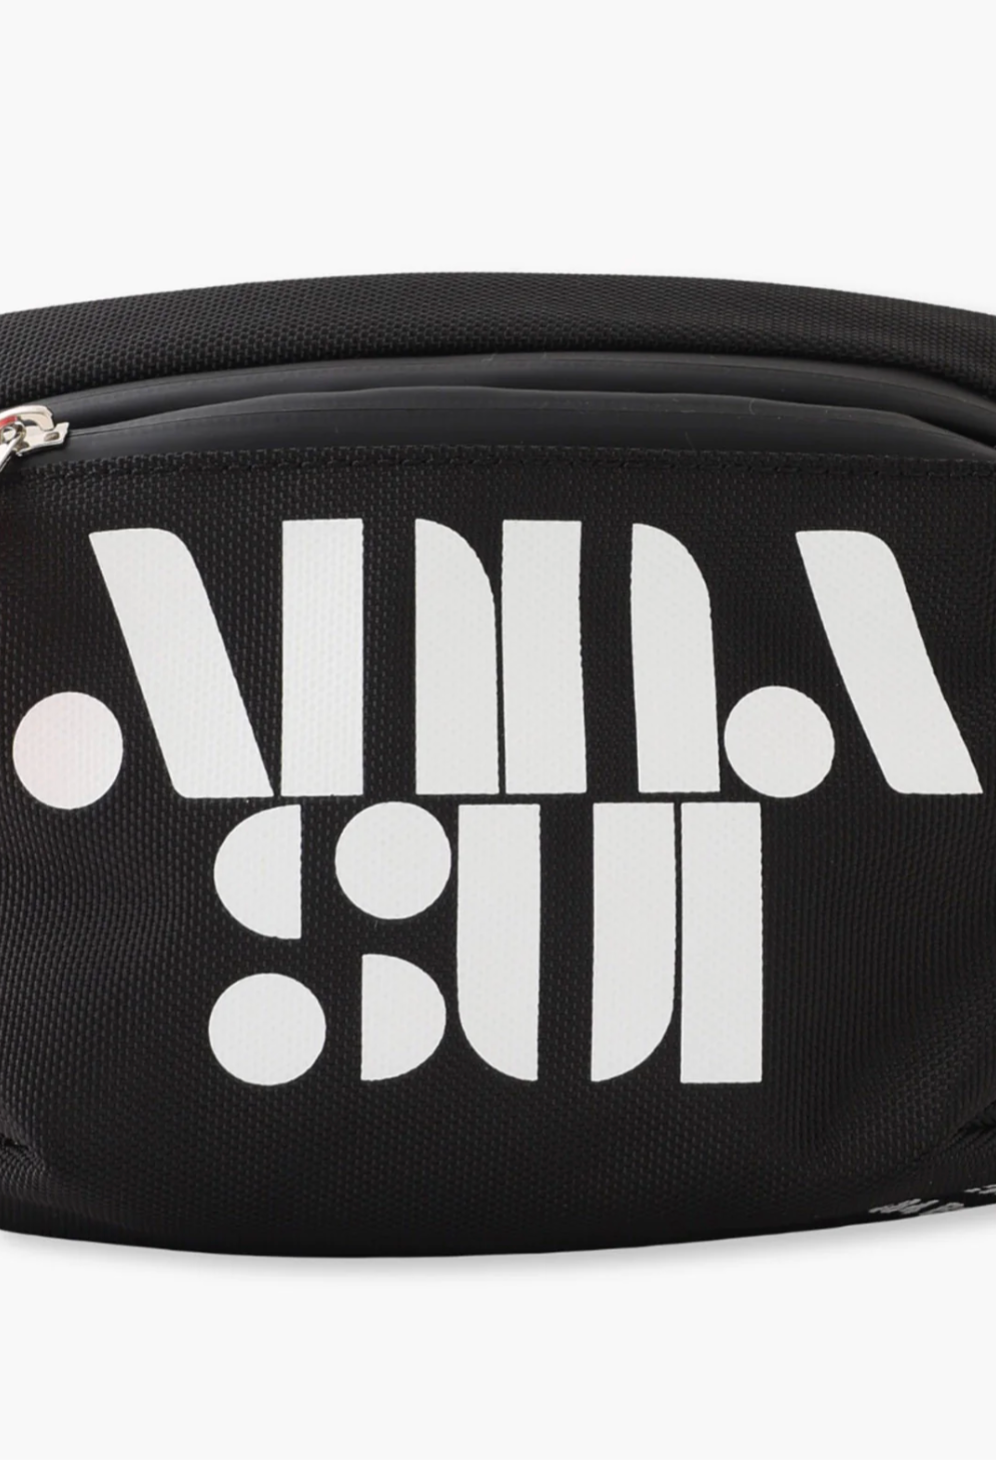 Fanny pack front detail of Anna Sui logo in retro style lettering